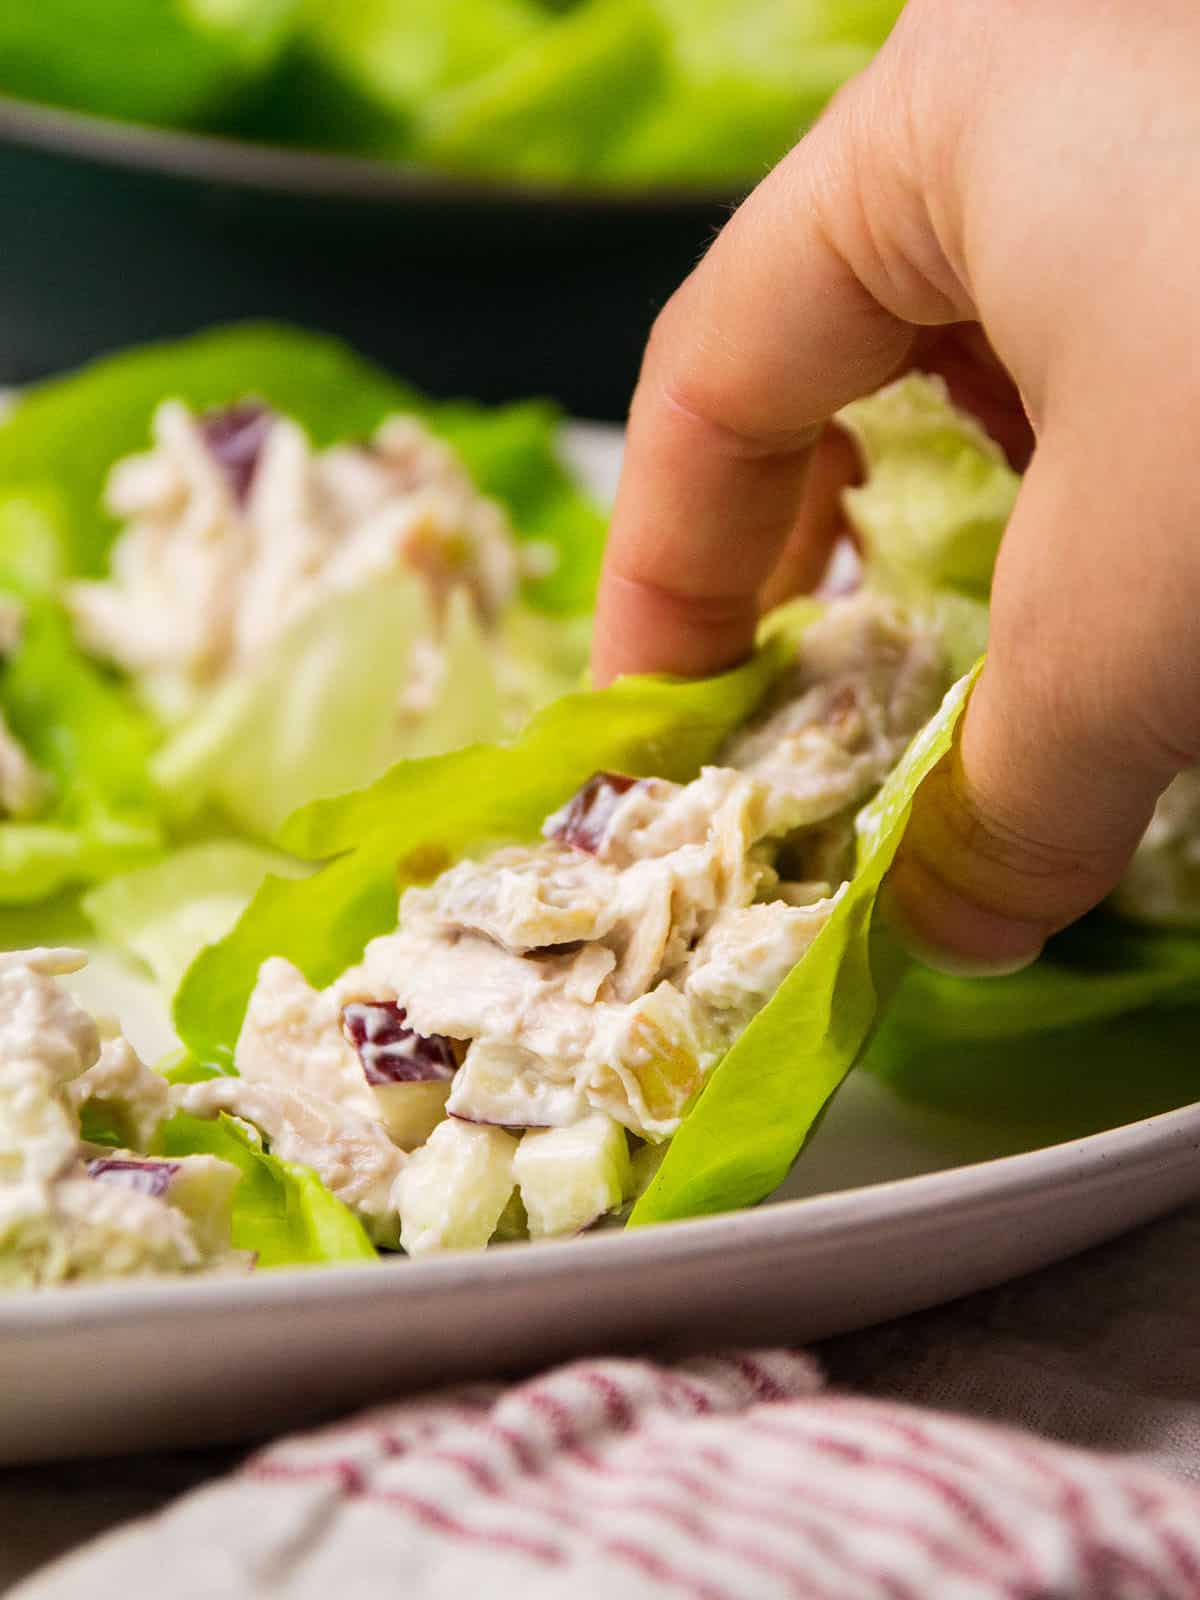 Hand lifting a lettuce wrap off a white plate.